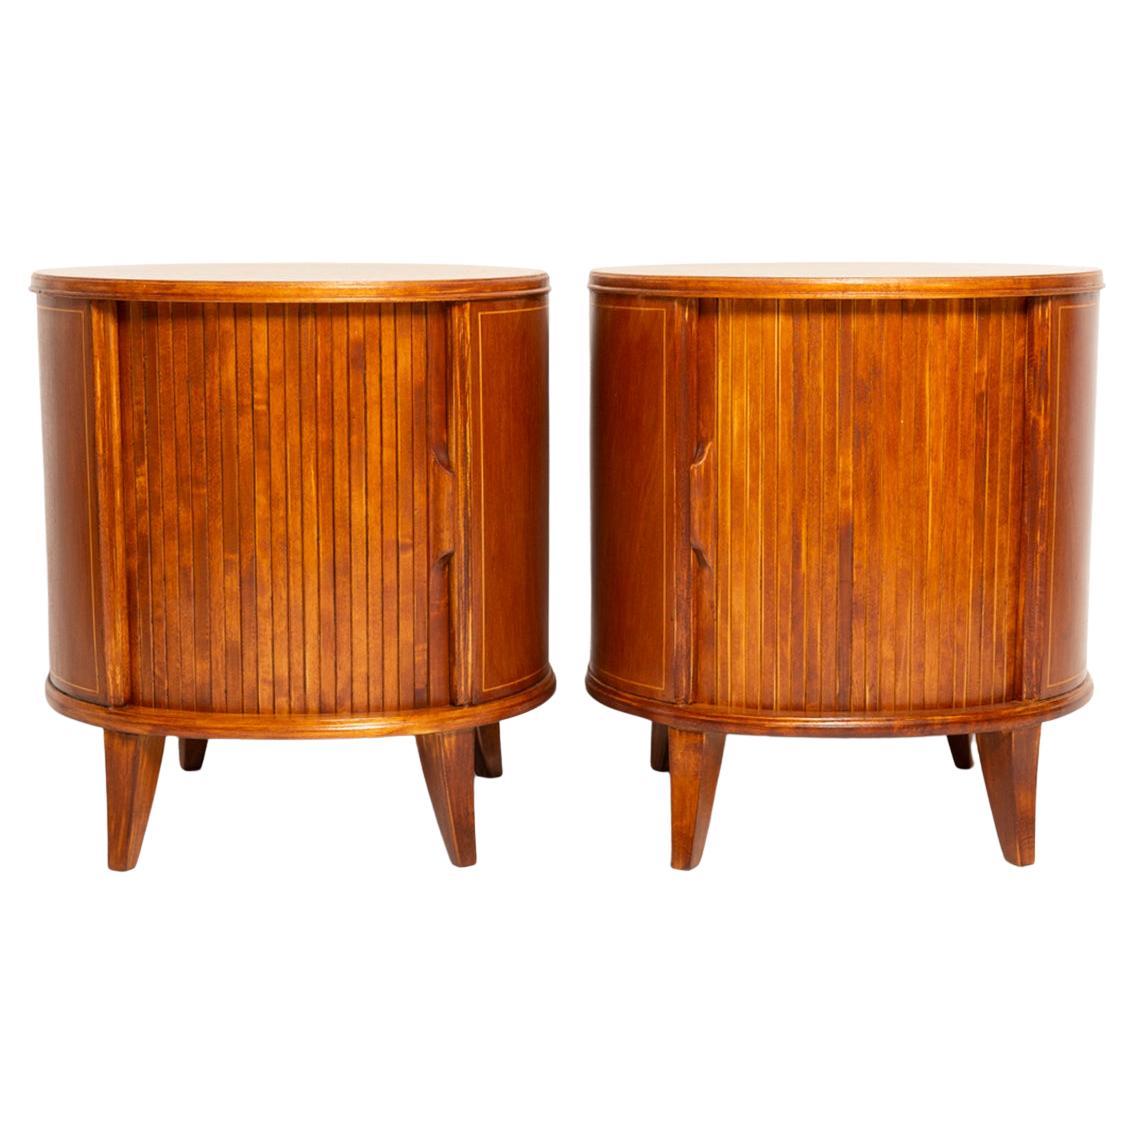 Set of Two Mid-Century Vintage Night Tables, Beech Wood, Europe, 1960s